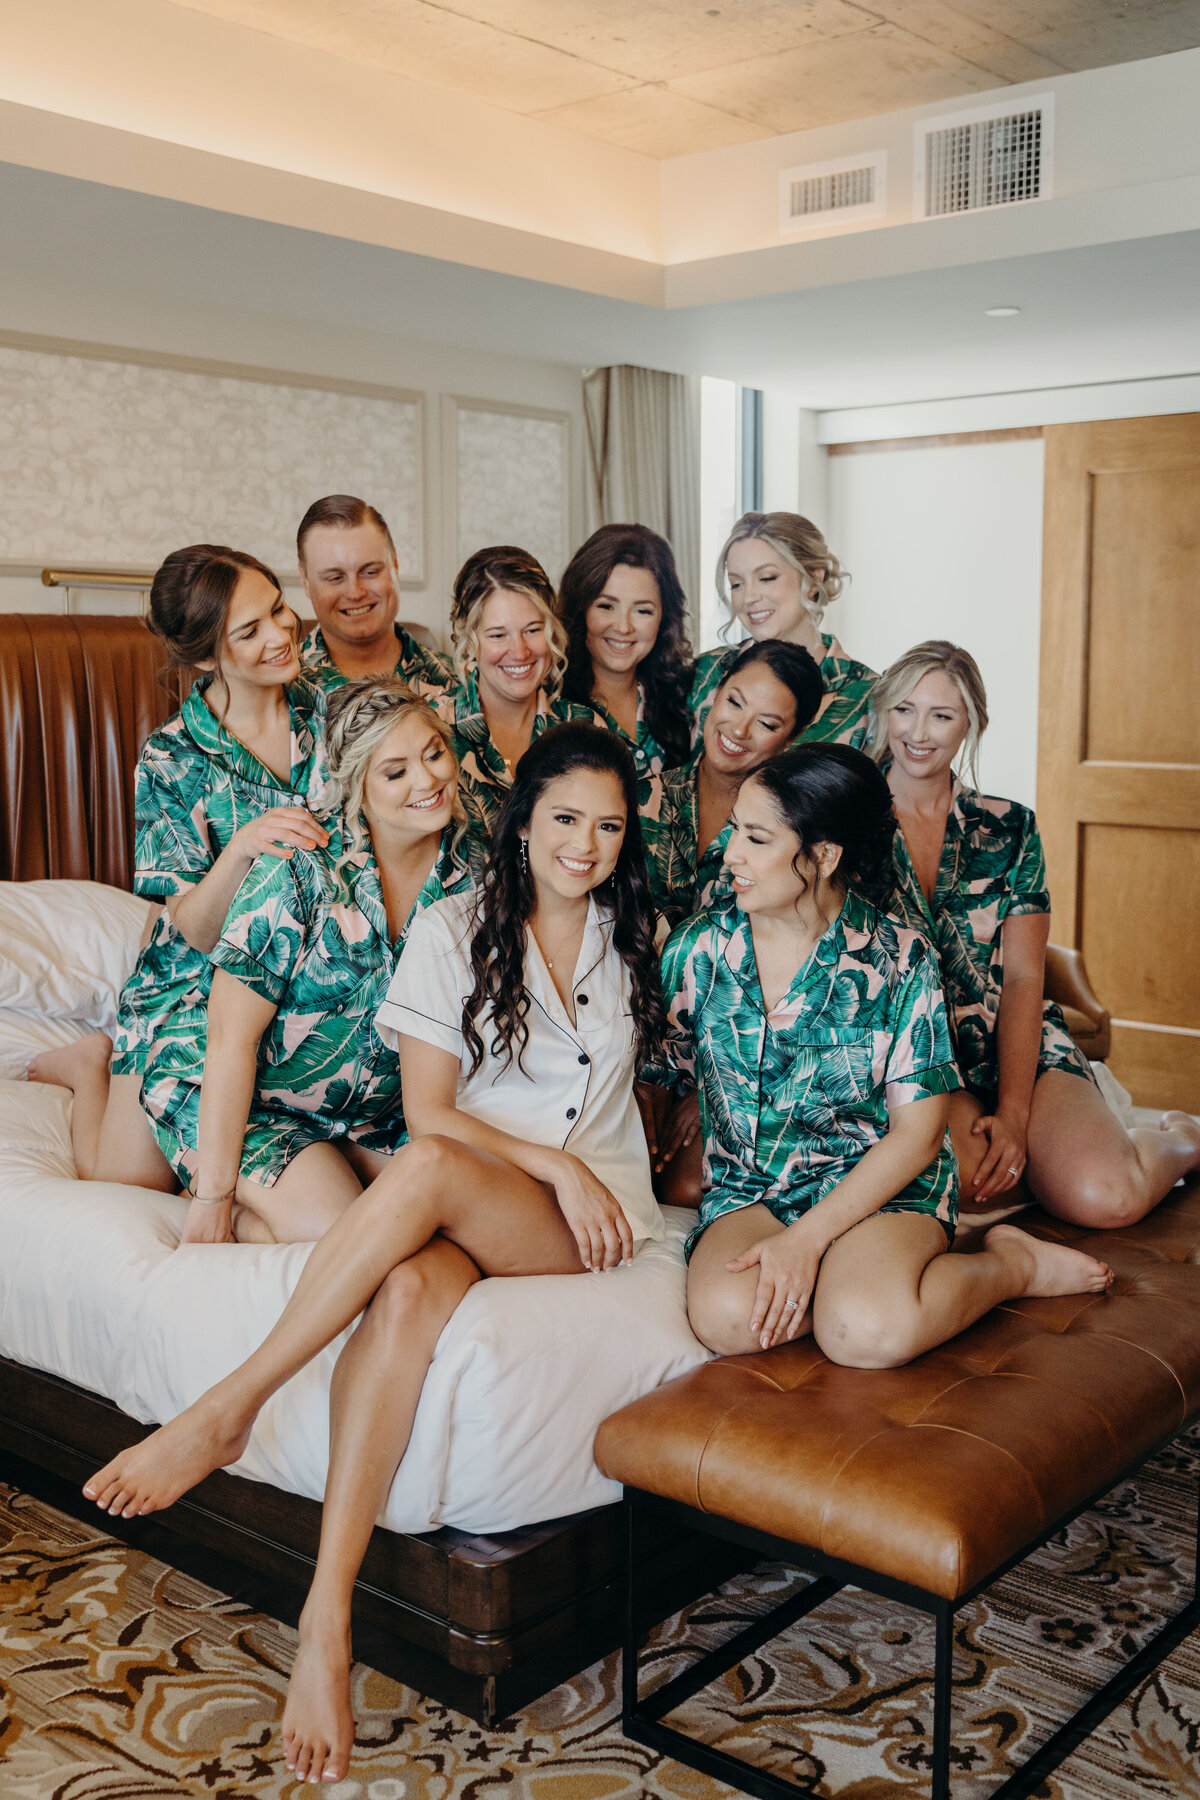 bride and bridesmaids having a fun moment on the bed in matching palm tree pajamas before getting dressed at the ben west palm